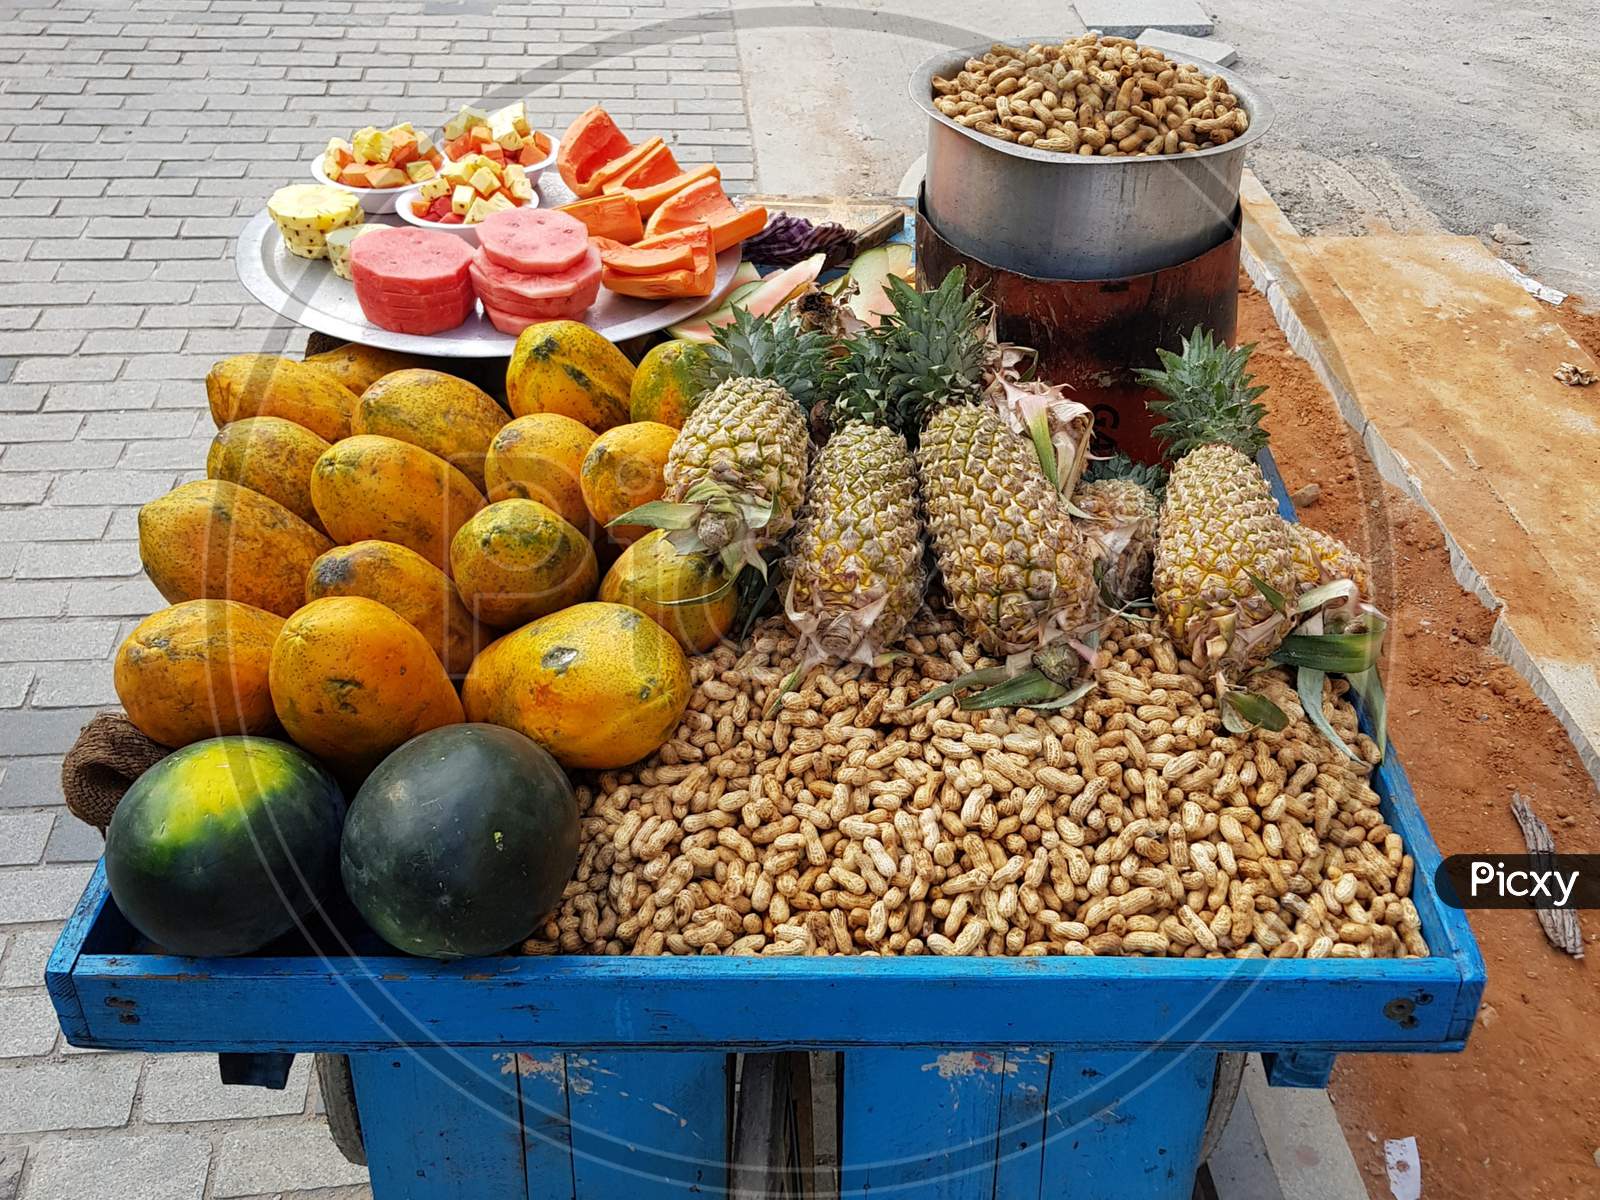 Indian Street Food Vendor Selling Peanuts And Fruit Bowls